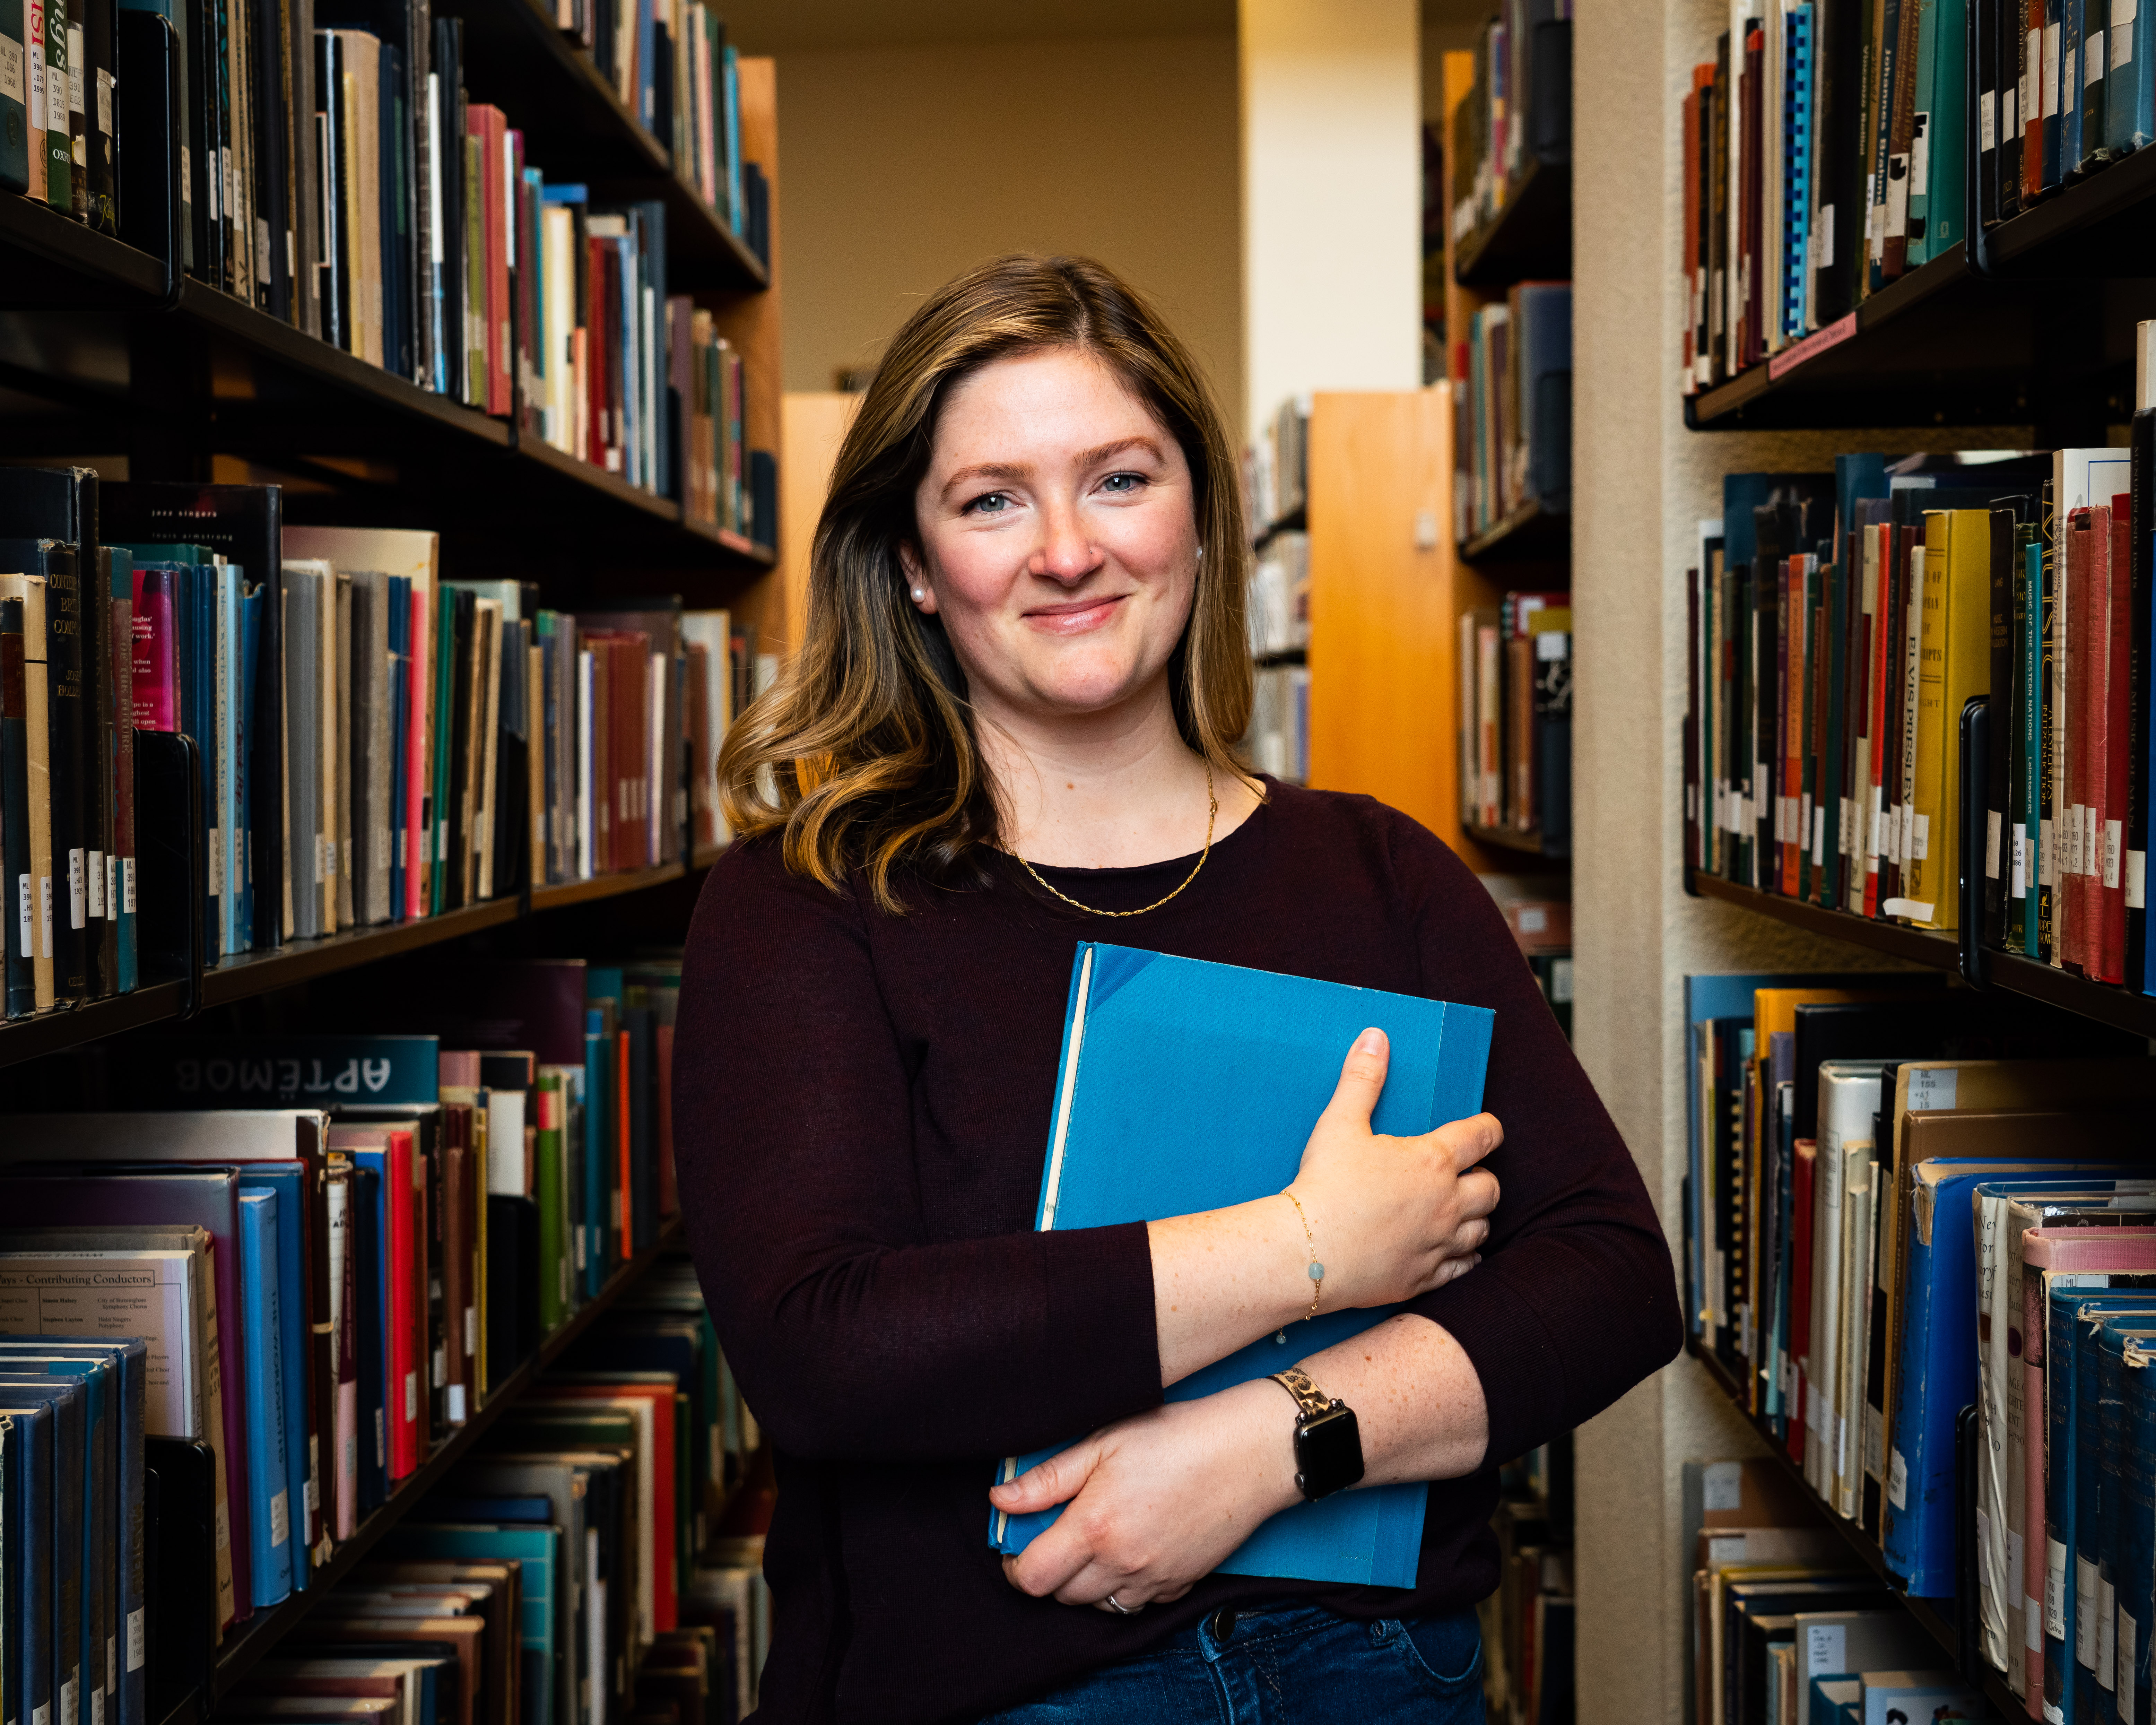 WWU graduate student of music Kyra Rengstorf holding a book to her chest with shelves of books in the background